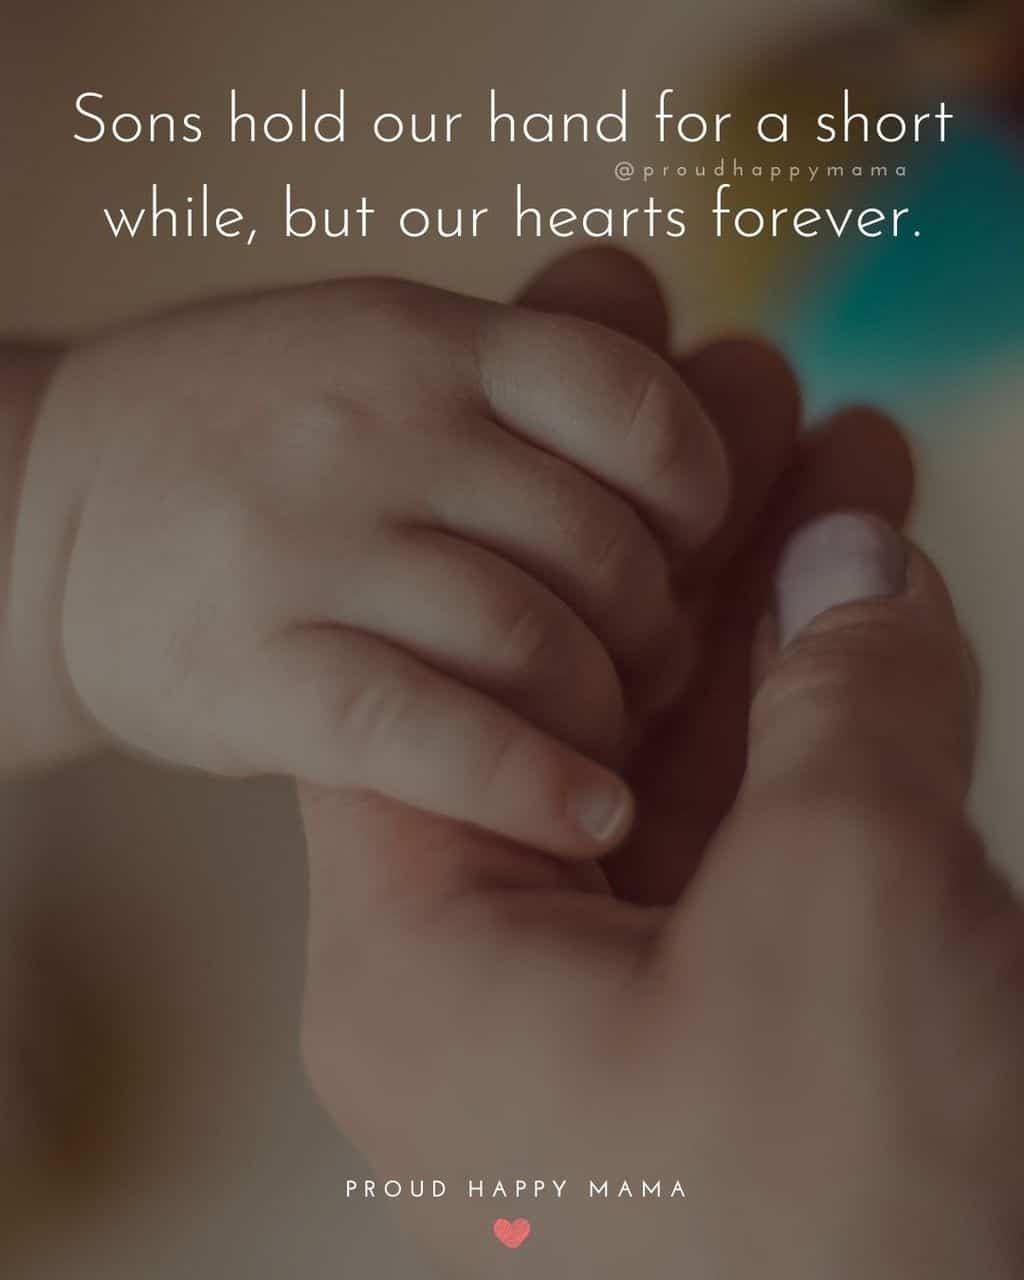 Son Quotes - Sons hold our hand for a short while, but our hearts forever.’